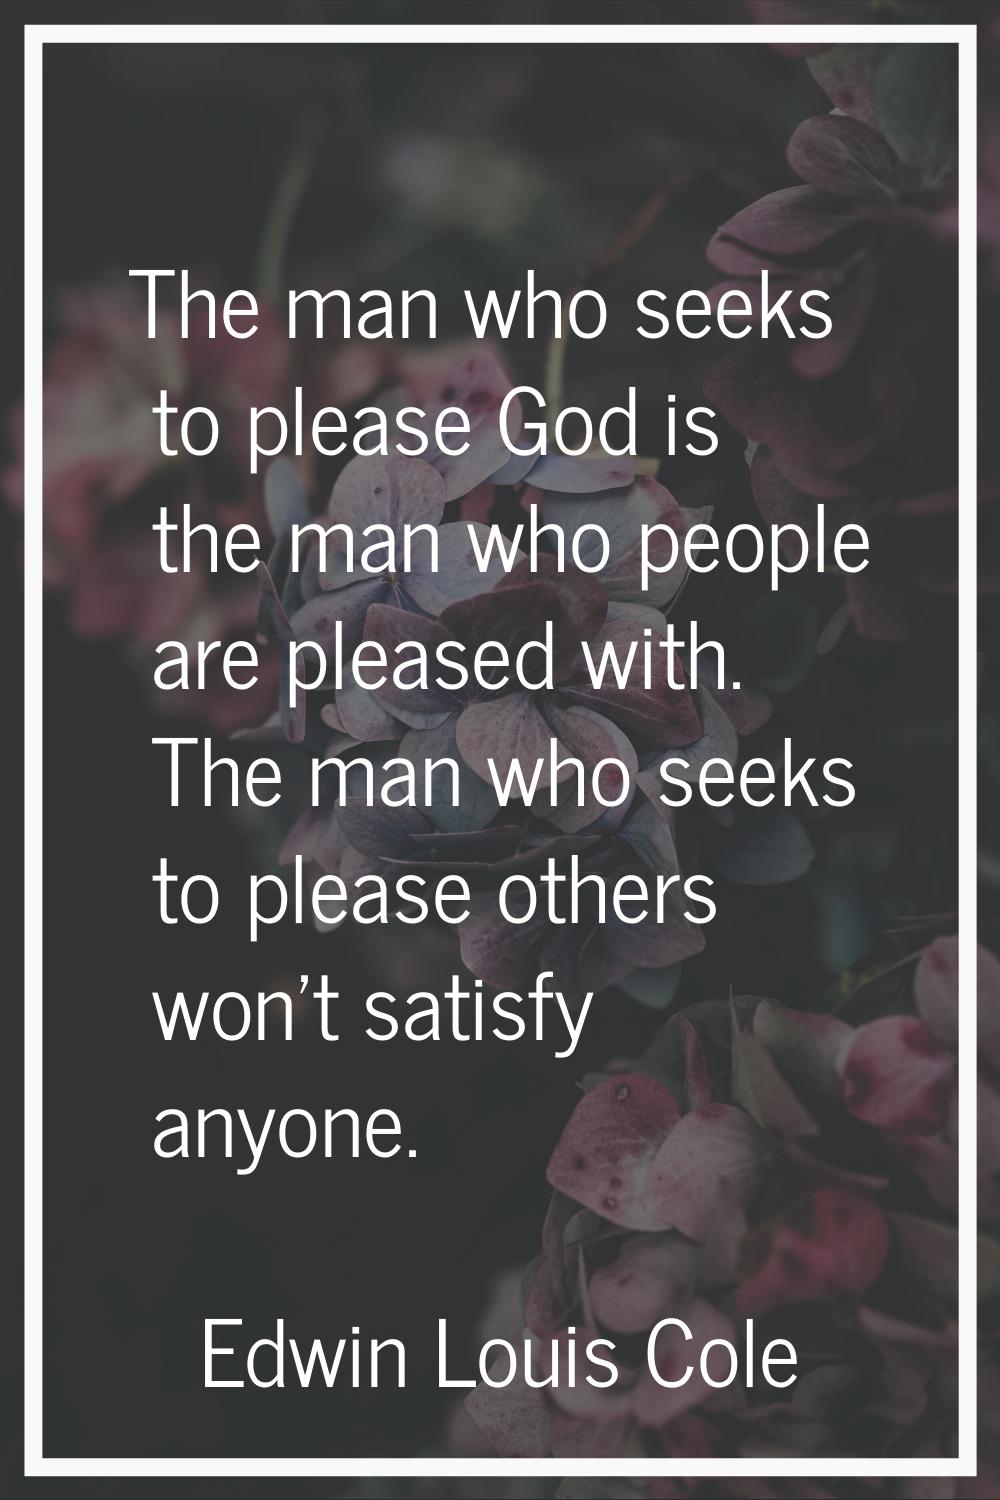 The man who seeks to please God is the man who people are pleased with. The man who seeks to please